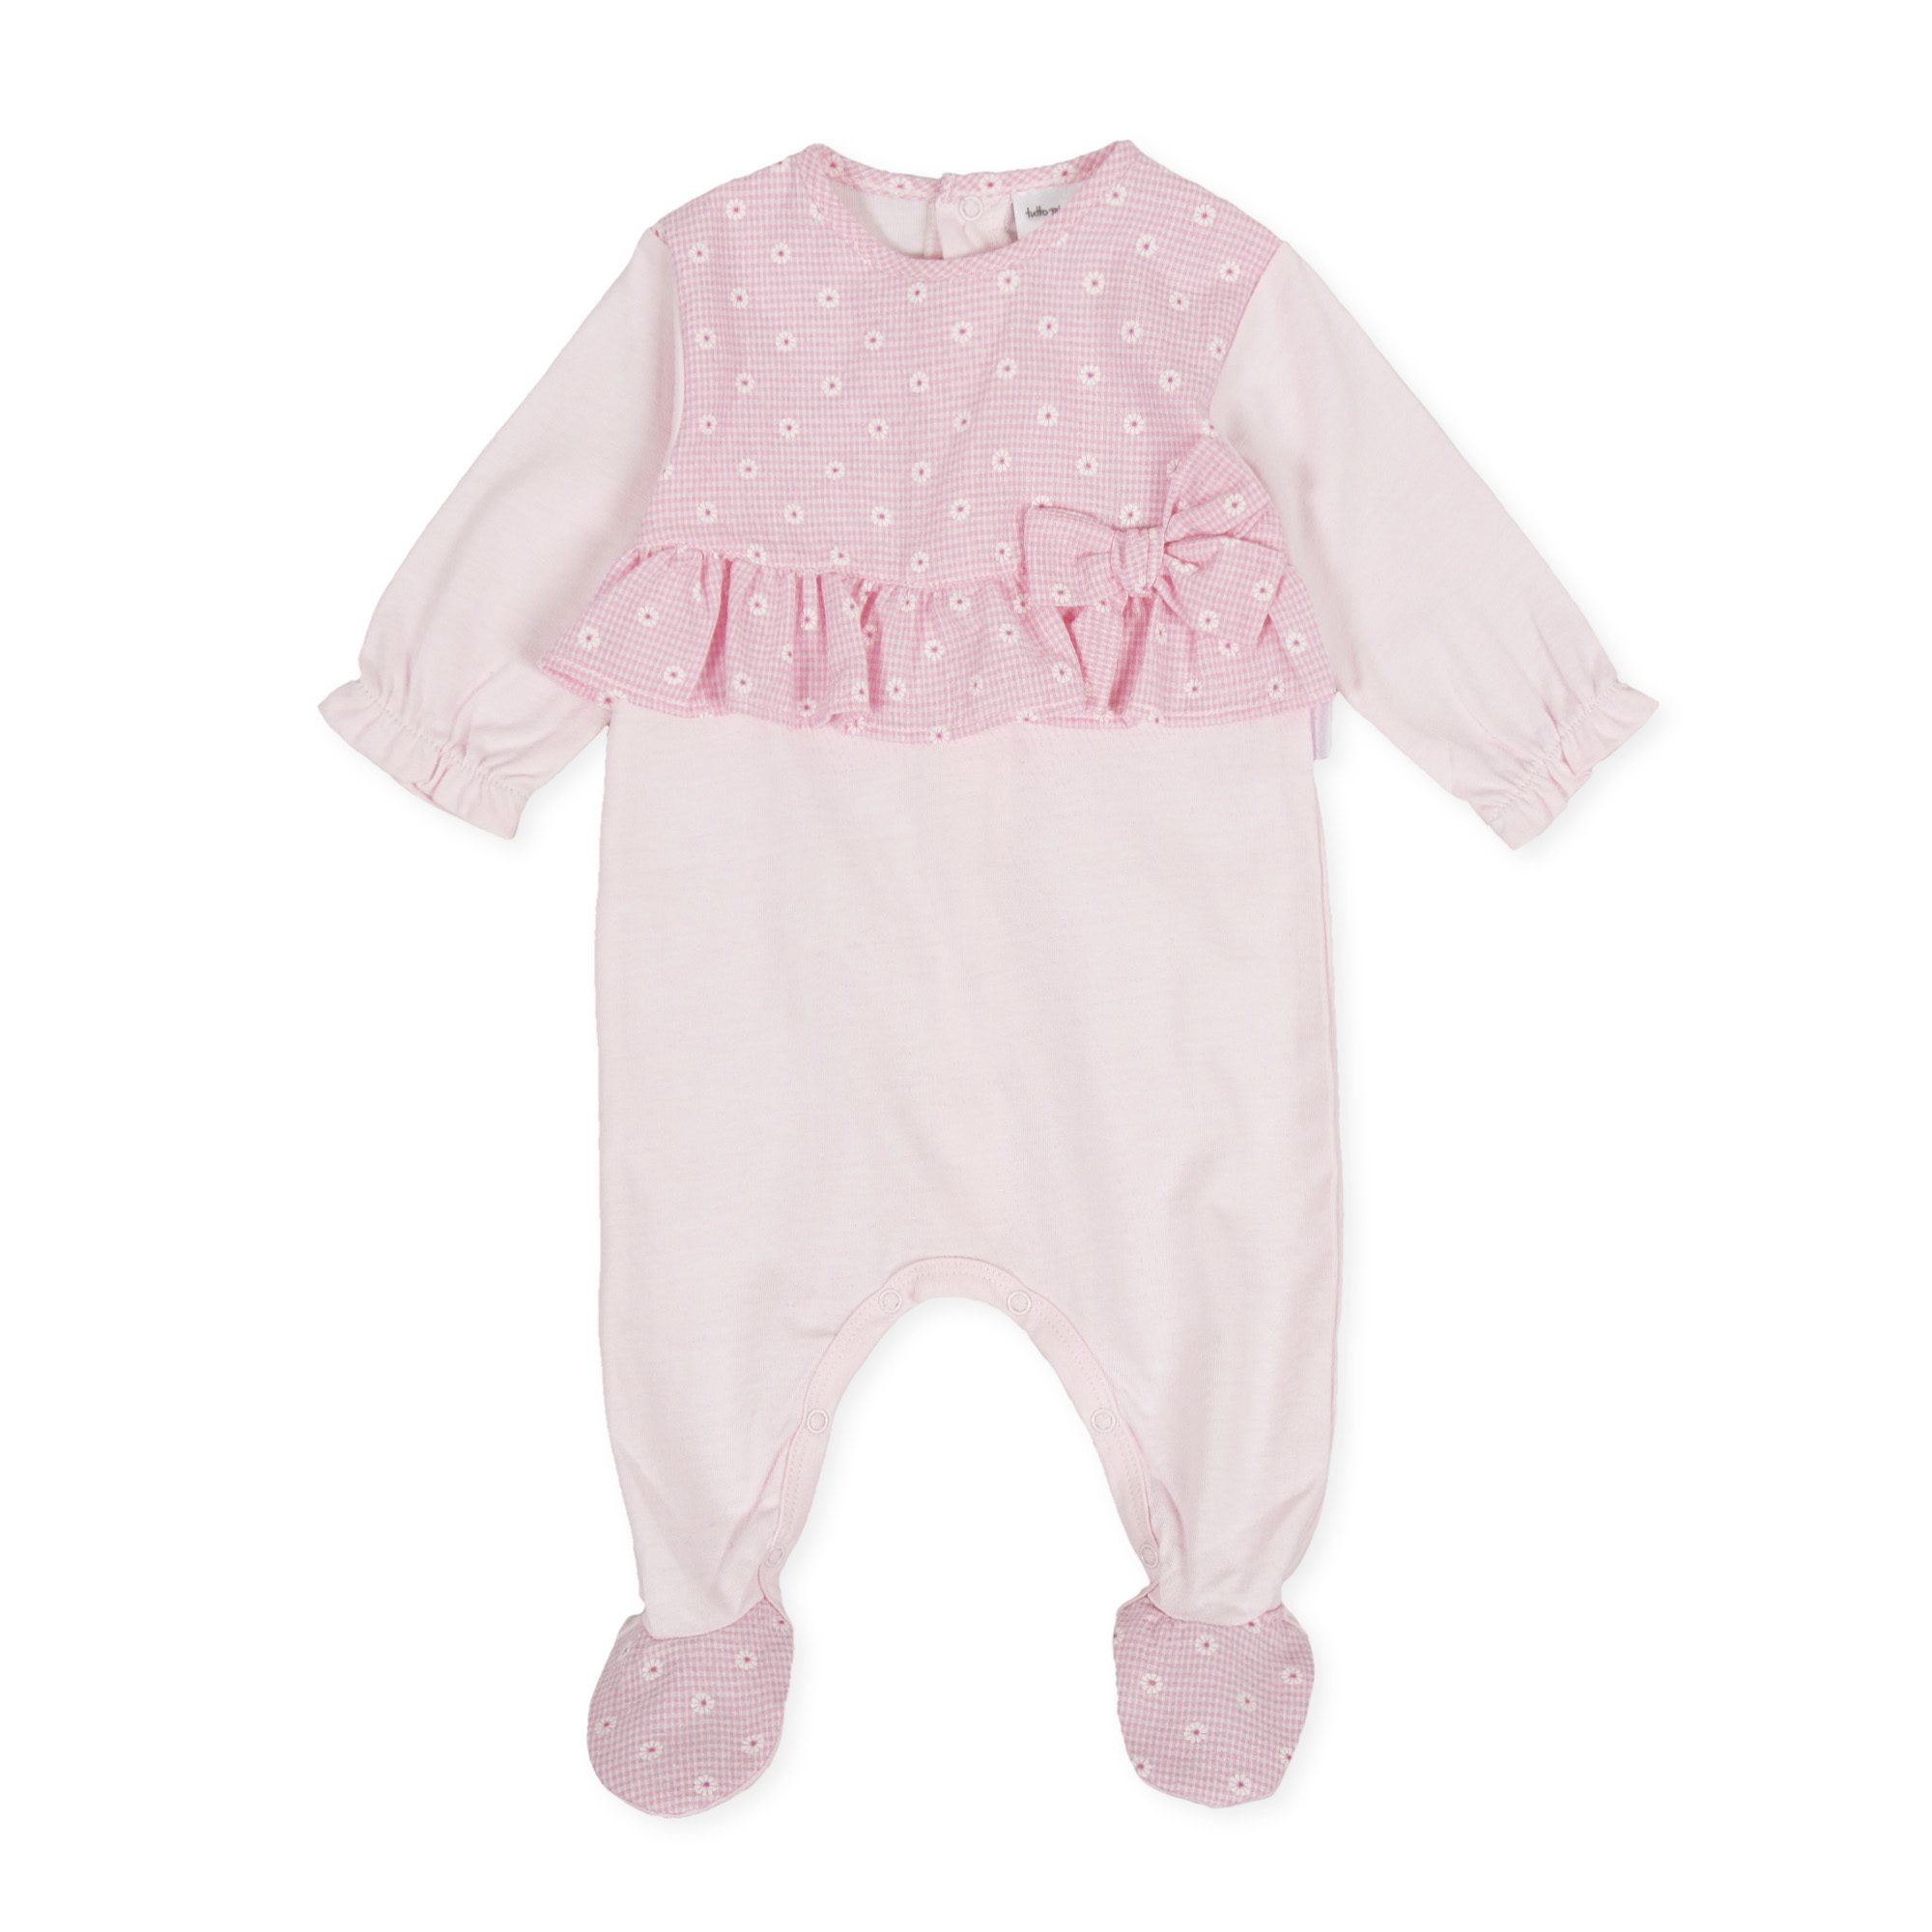 Tutto Piccolo Pink Babygrow 8184 - Little Angels childrenswear